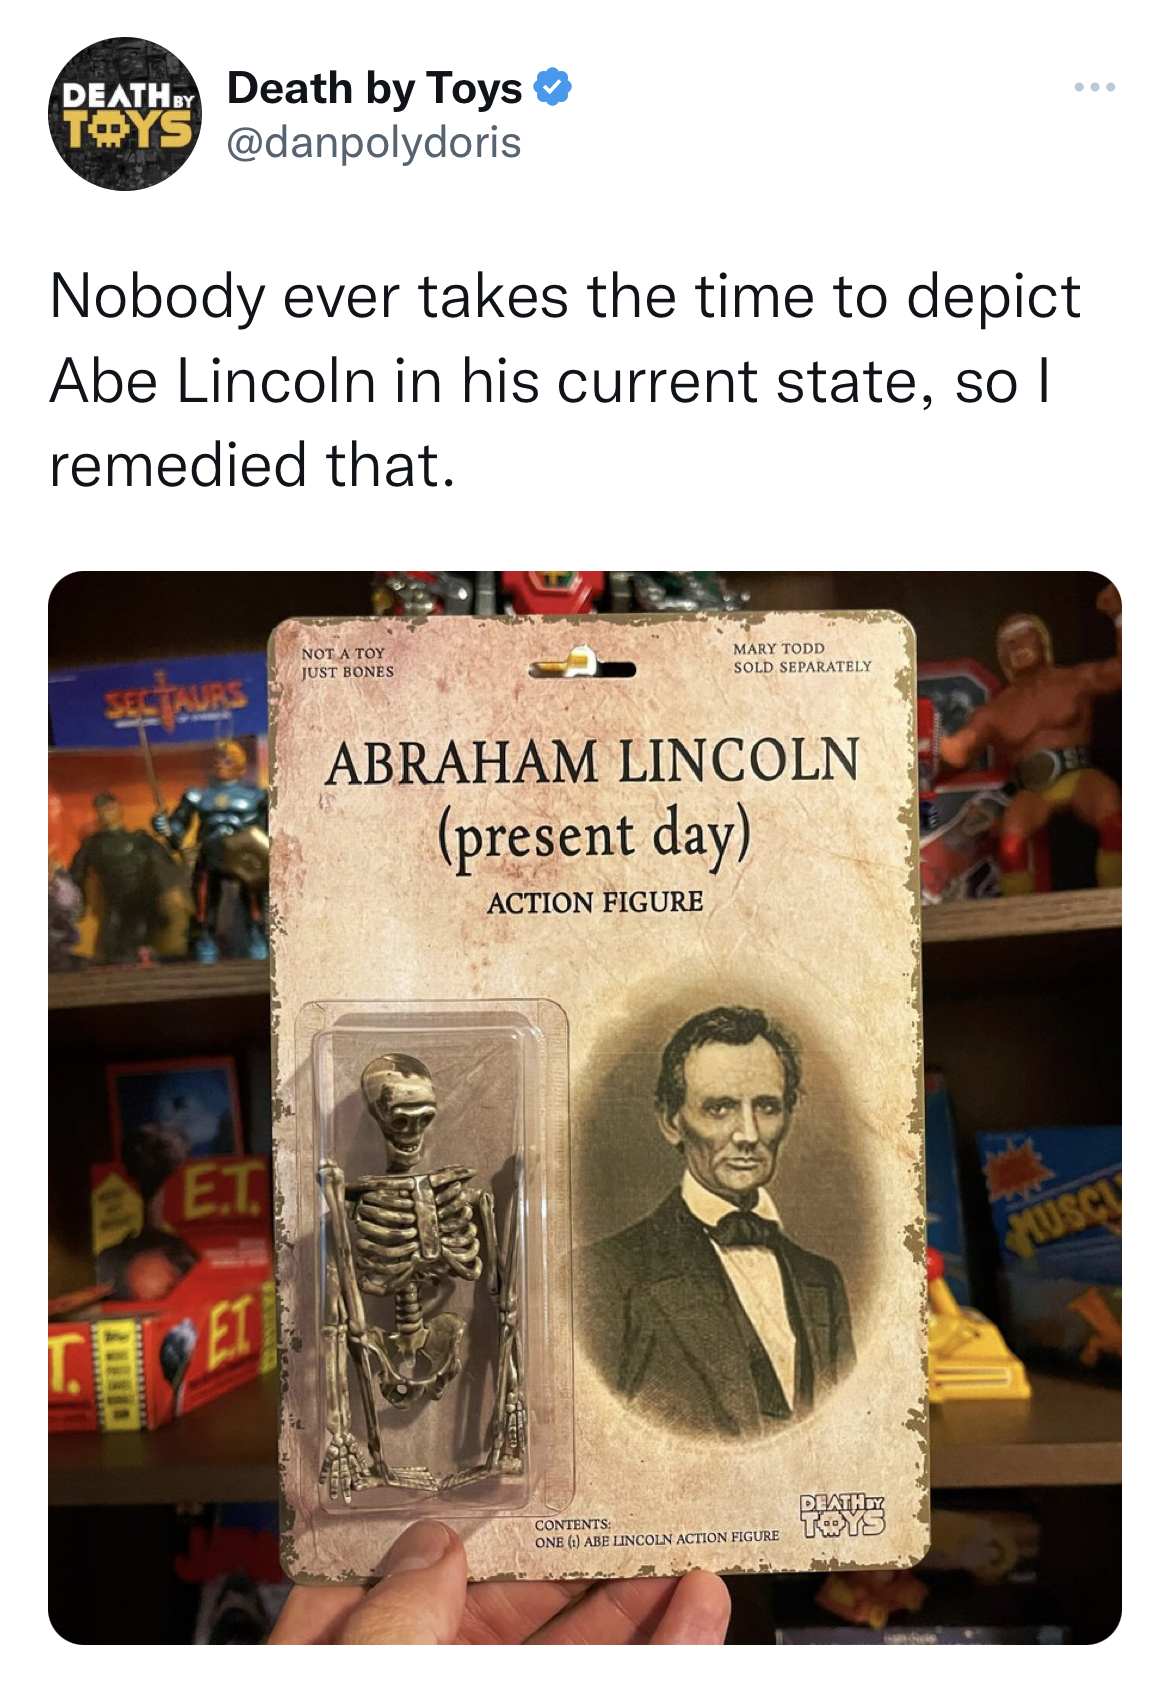 Tweets dunking on celebs - Death Death by Toys Toys Nobody ever takes the time to depict Abe Lincoln in his current state, so I remedied that. Deriet E.T. Nola Toy Att Be My To Bly Abraham Lincoln present day Action Figure plz Ho T An Action Toys Musc